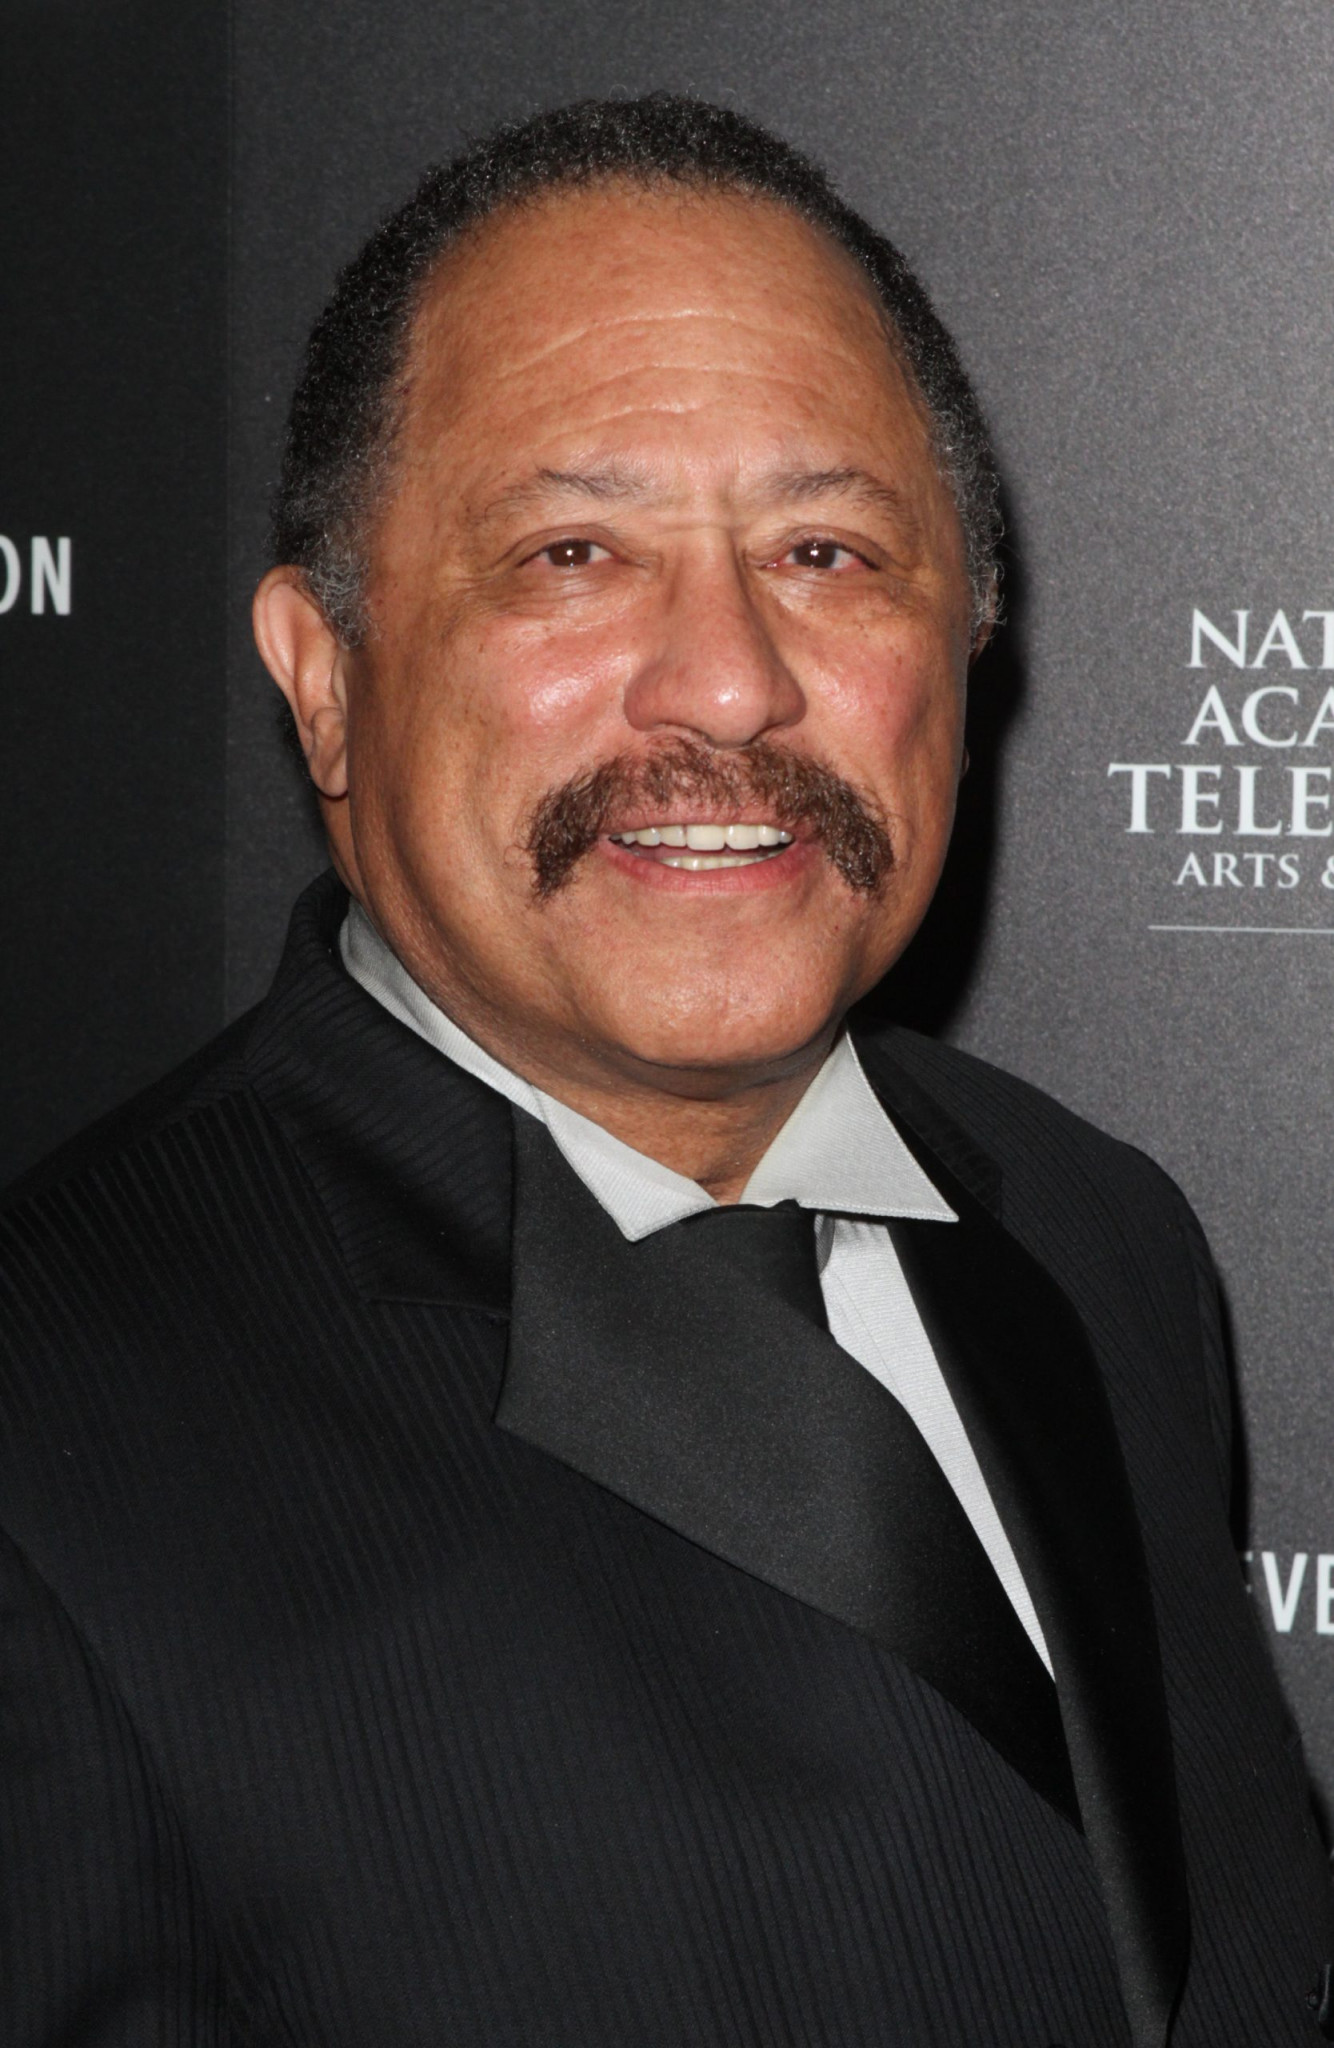 All About Judge Joe Brown Age, Net Worth, Wife. Arrested?!